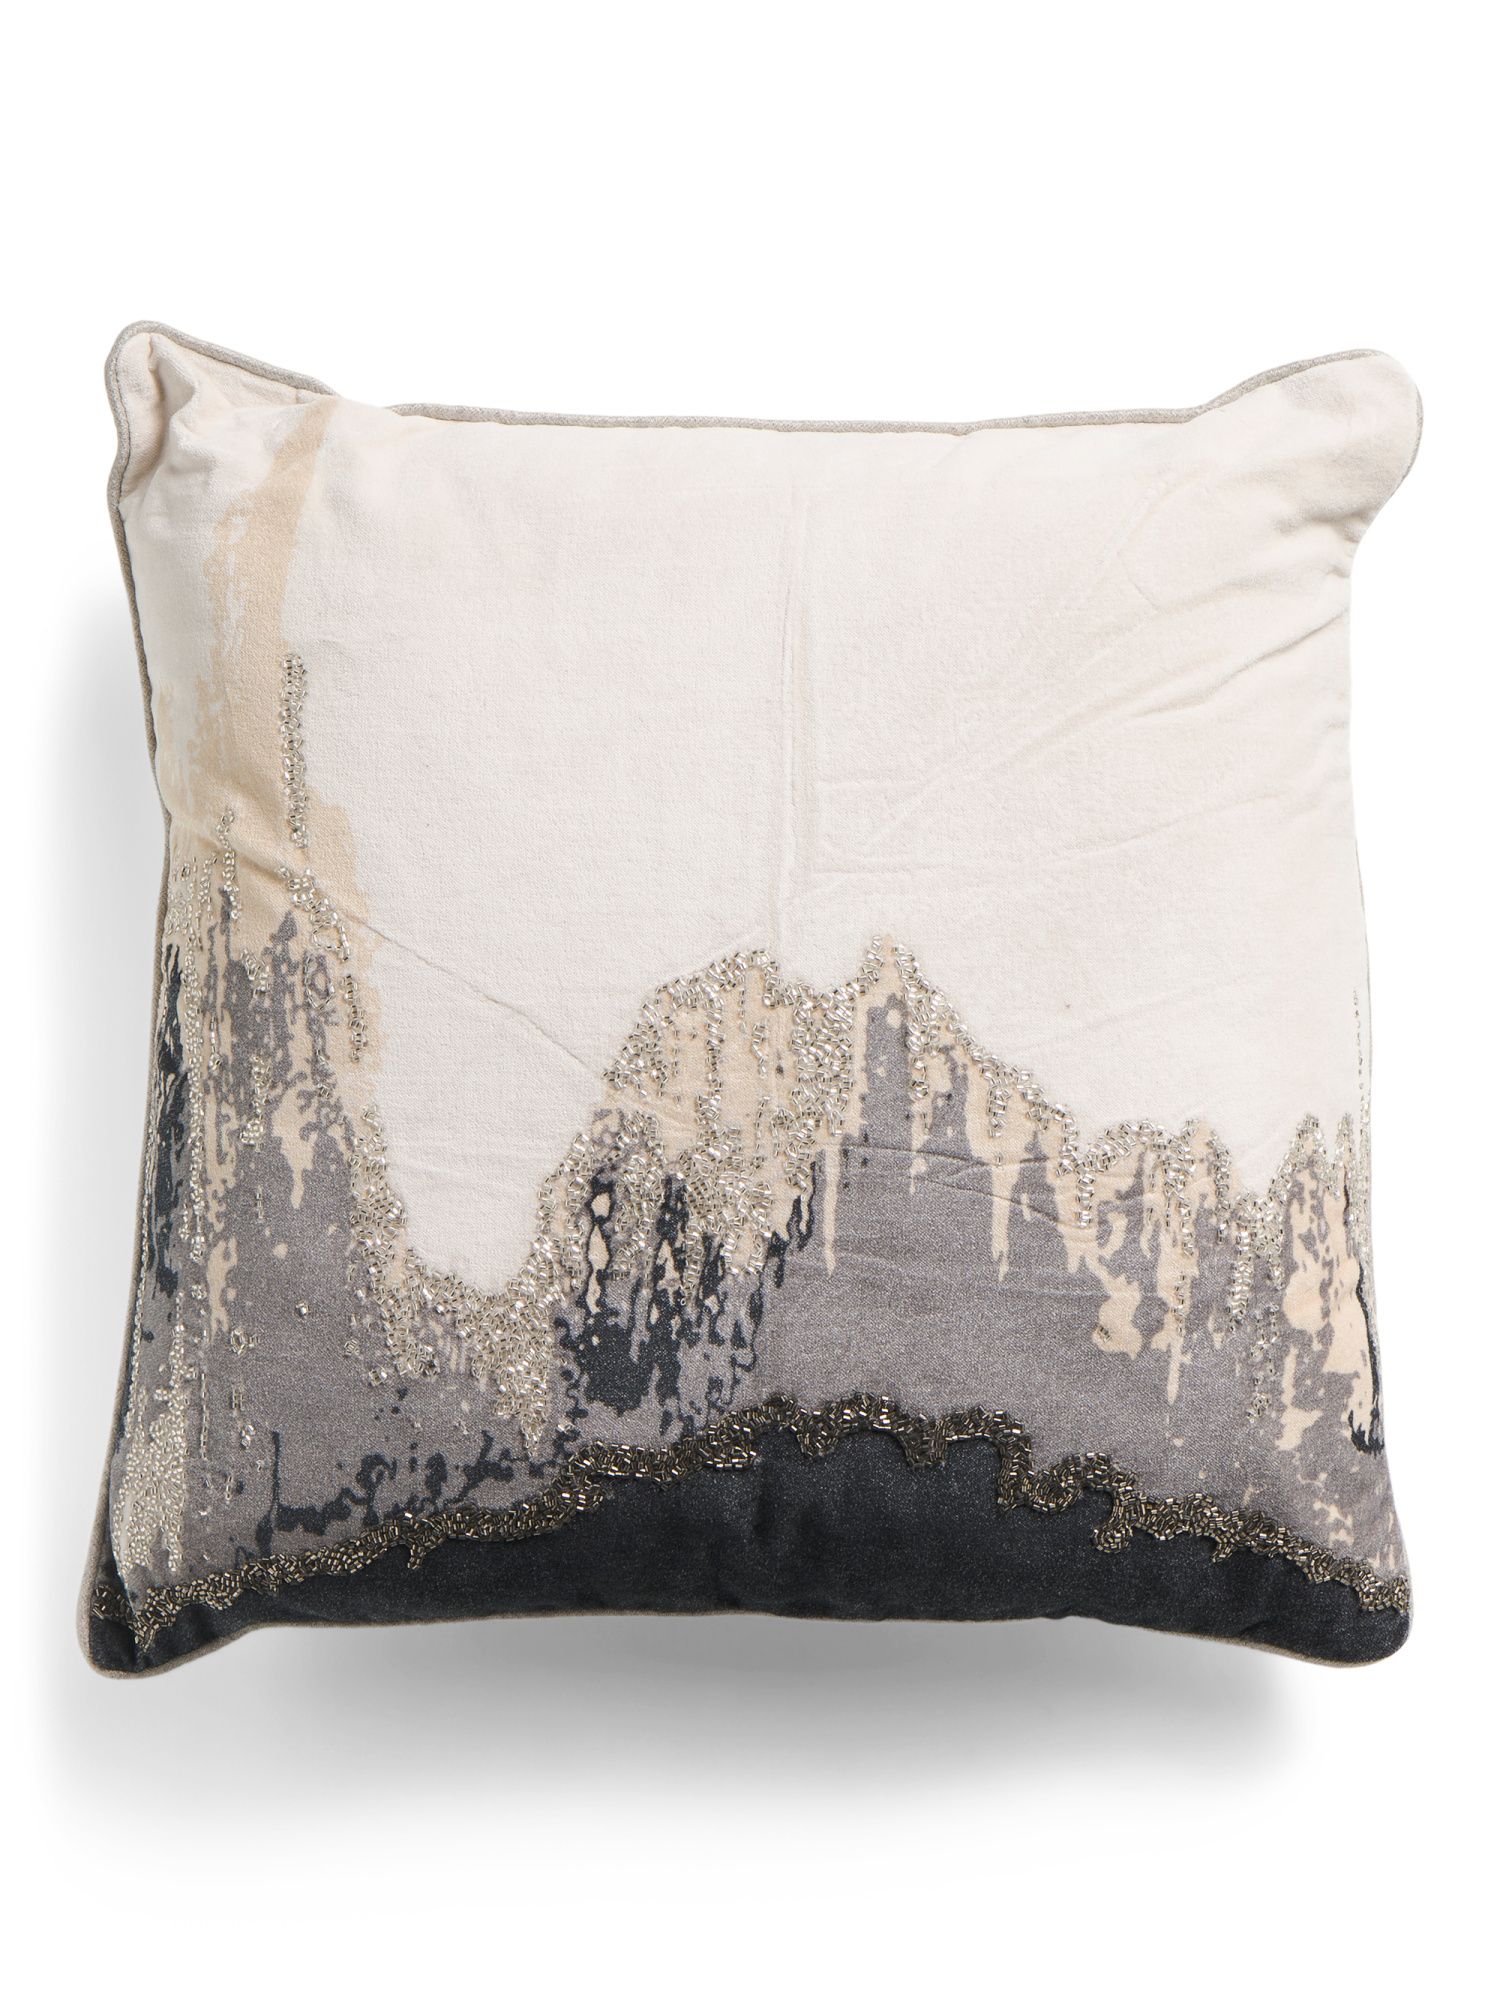 20x20 Velvet Printed Pillow With Beaded Embroidery | TJ Maxx